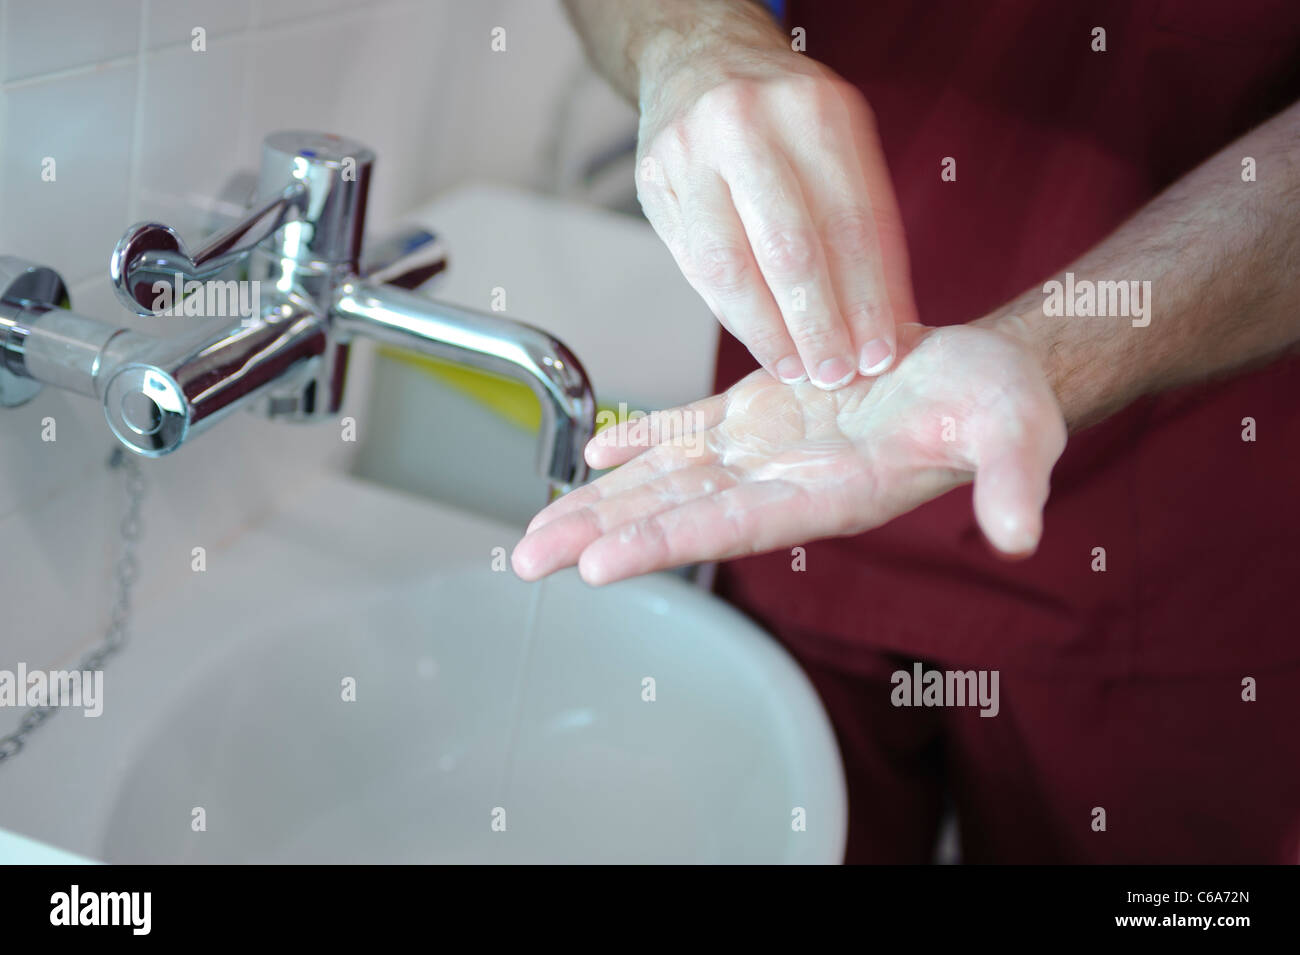 male nurse hands washing at sink Stock Photo